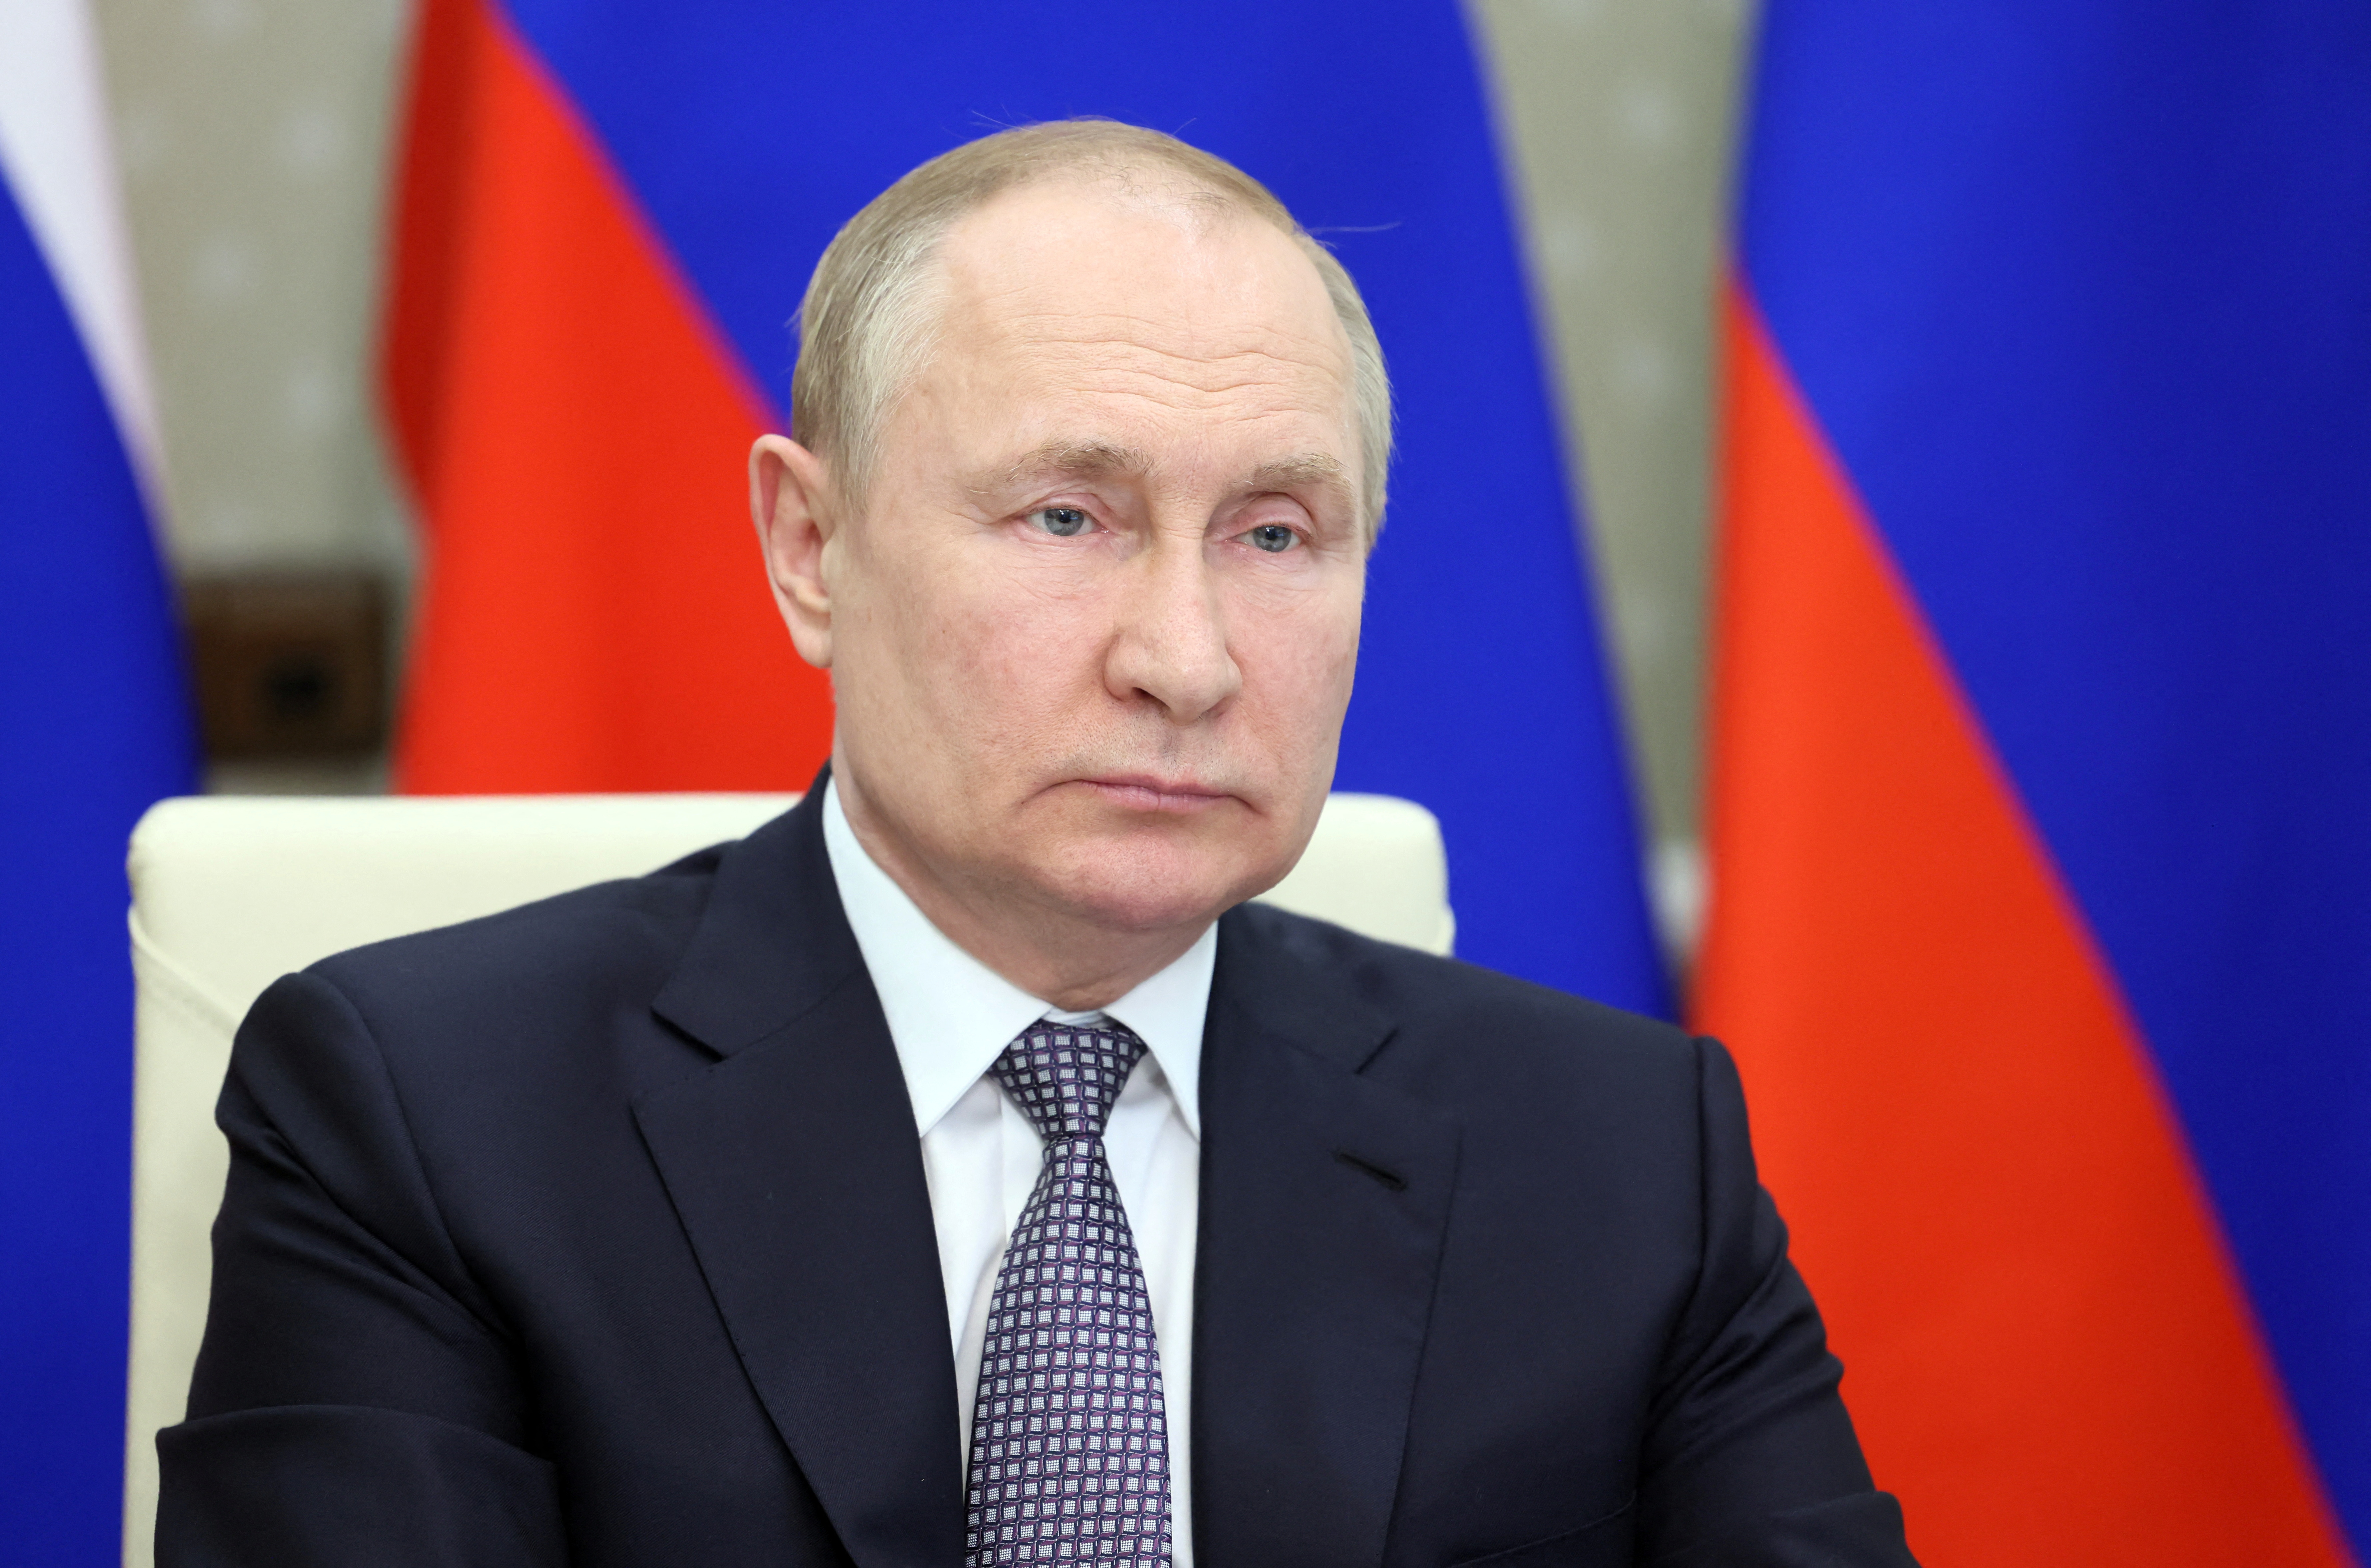 Russian President Vladimir Putin attends a BRICS+ meeting via a video link in the Moscow region